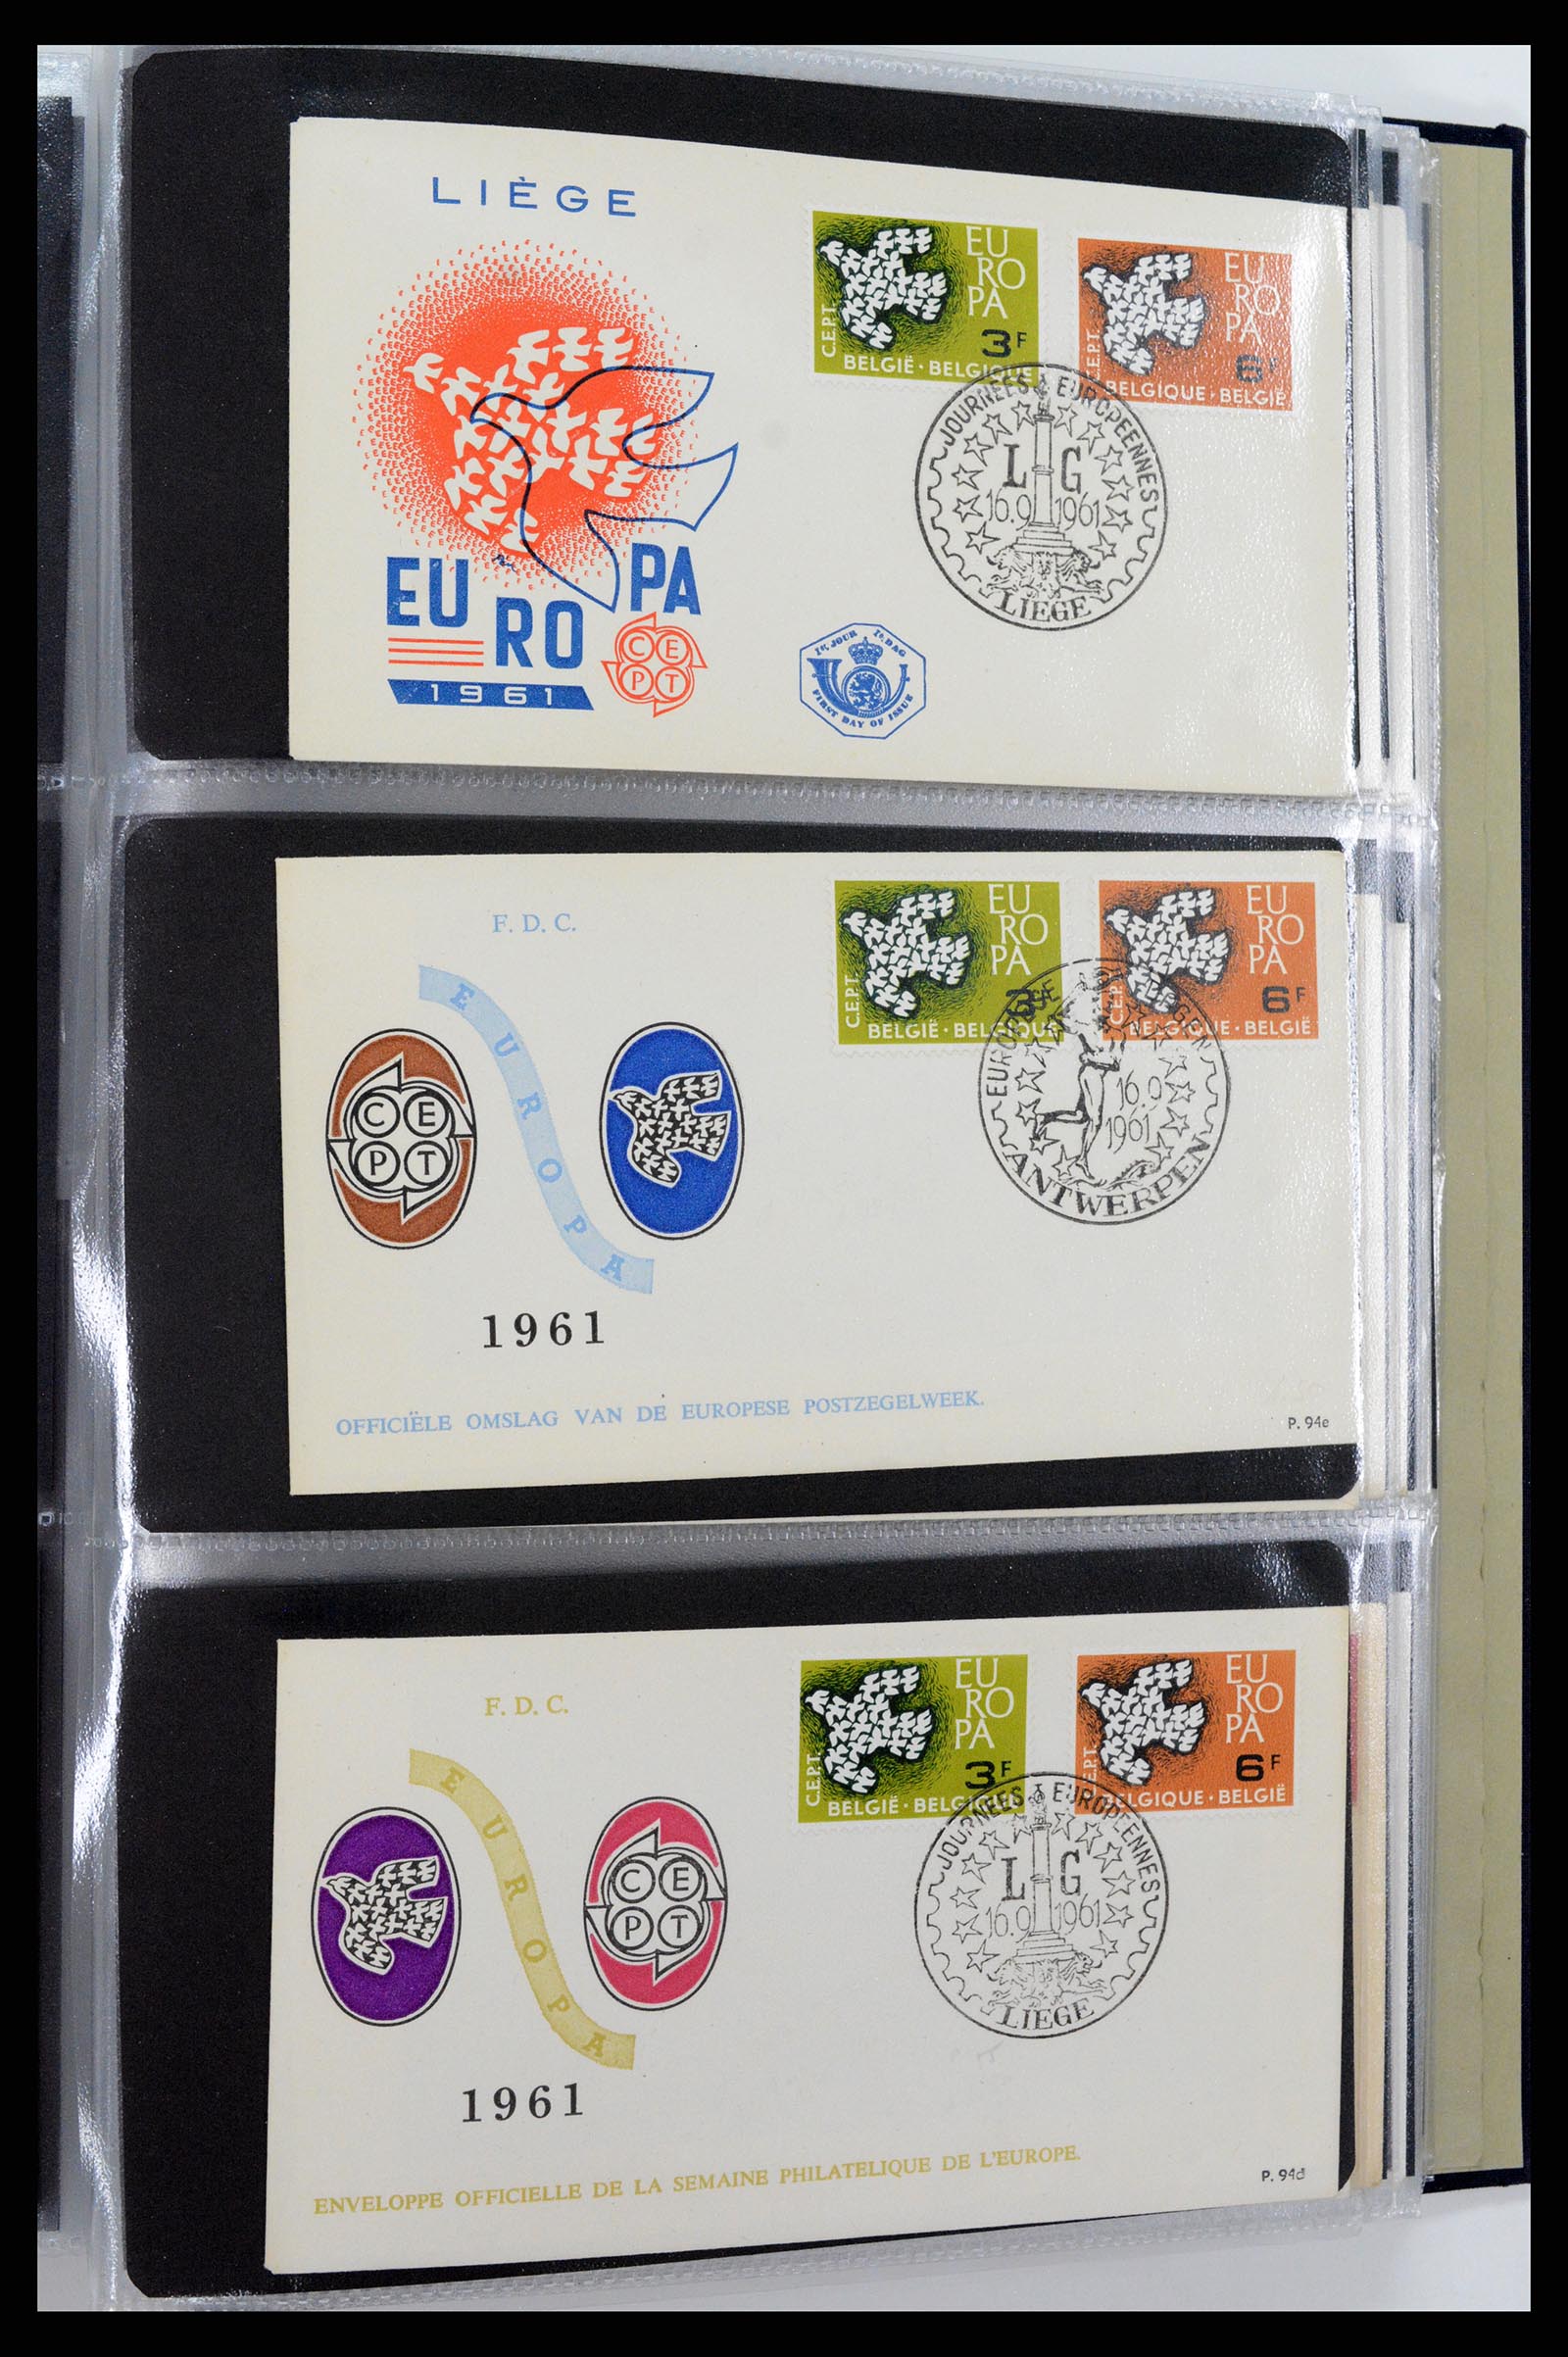 37694 046 - Stamp collection 37694 Europa CEPT FDC's 1956-1970.